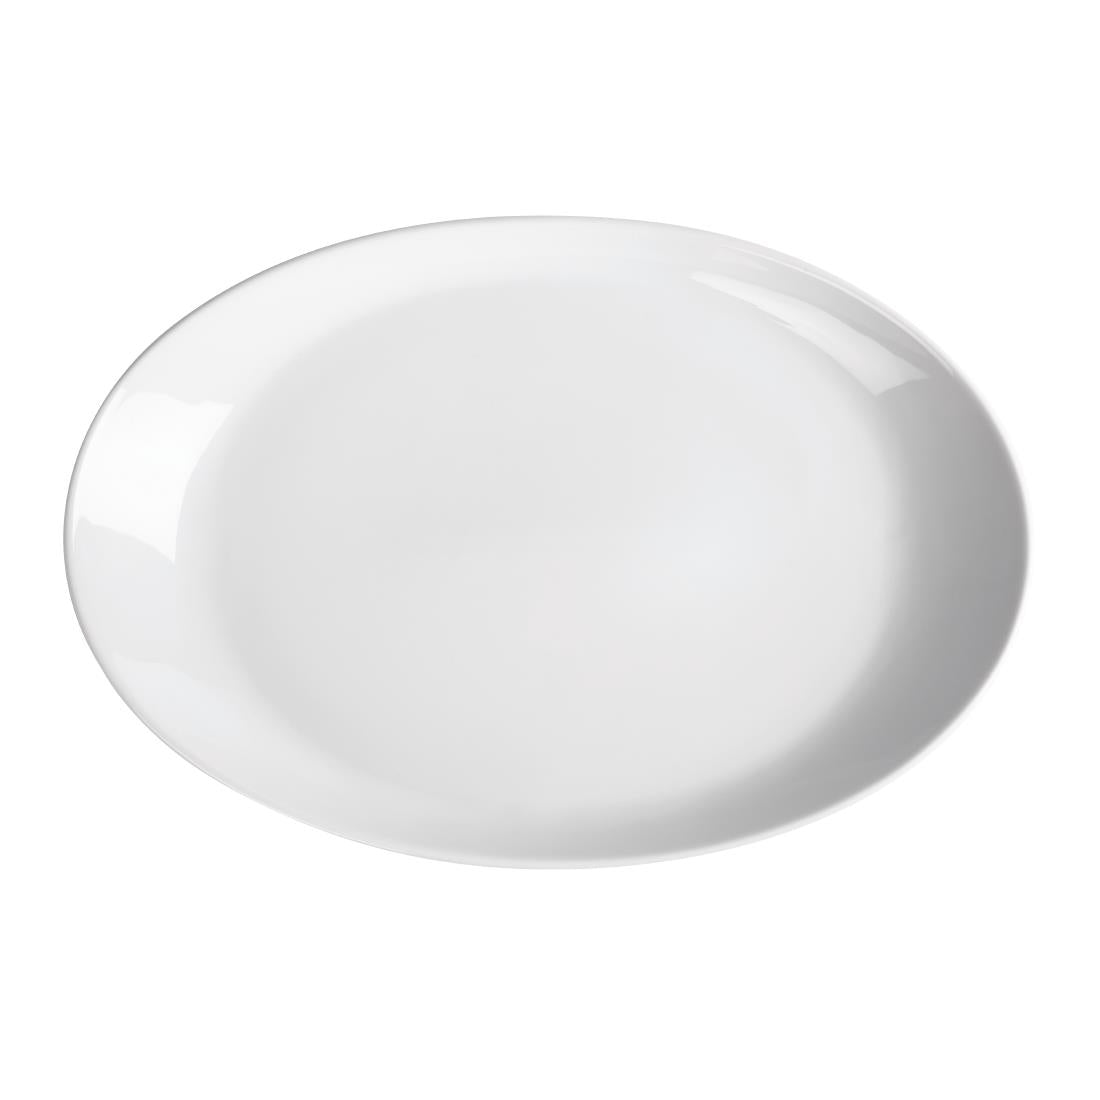 Royal Porcelain Classic White Oval Plates 340mm (Pack of 12)